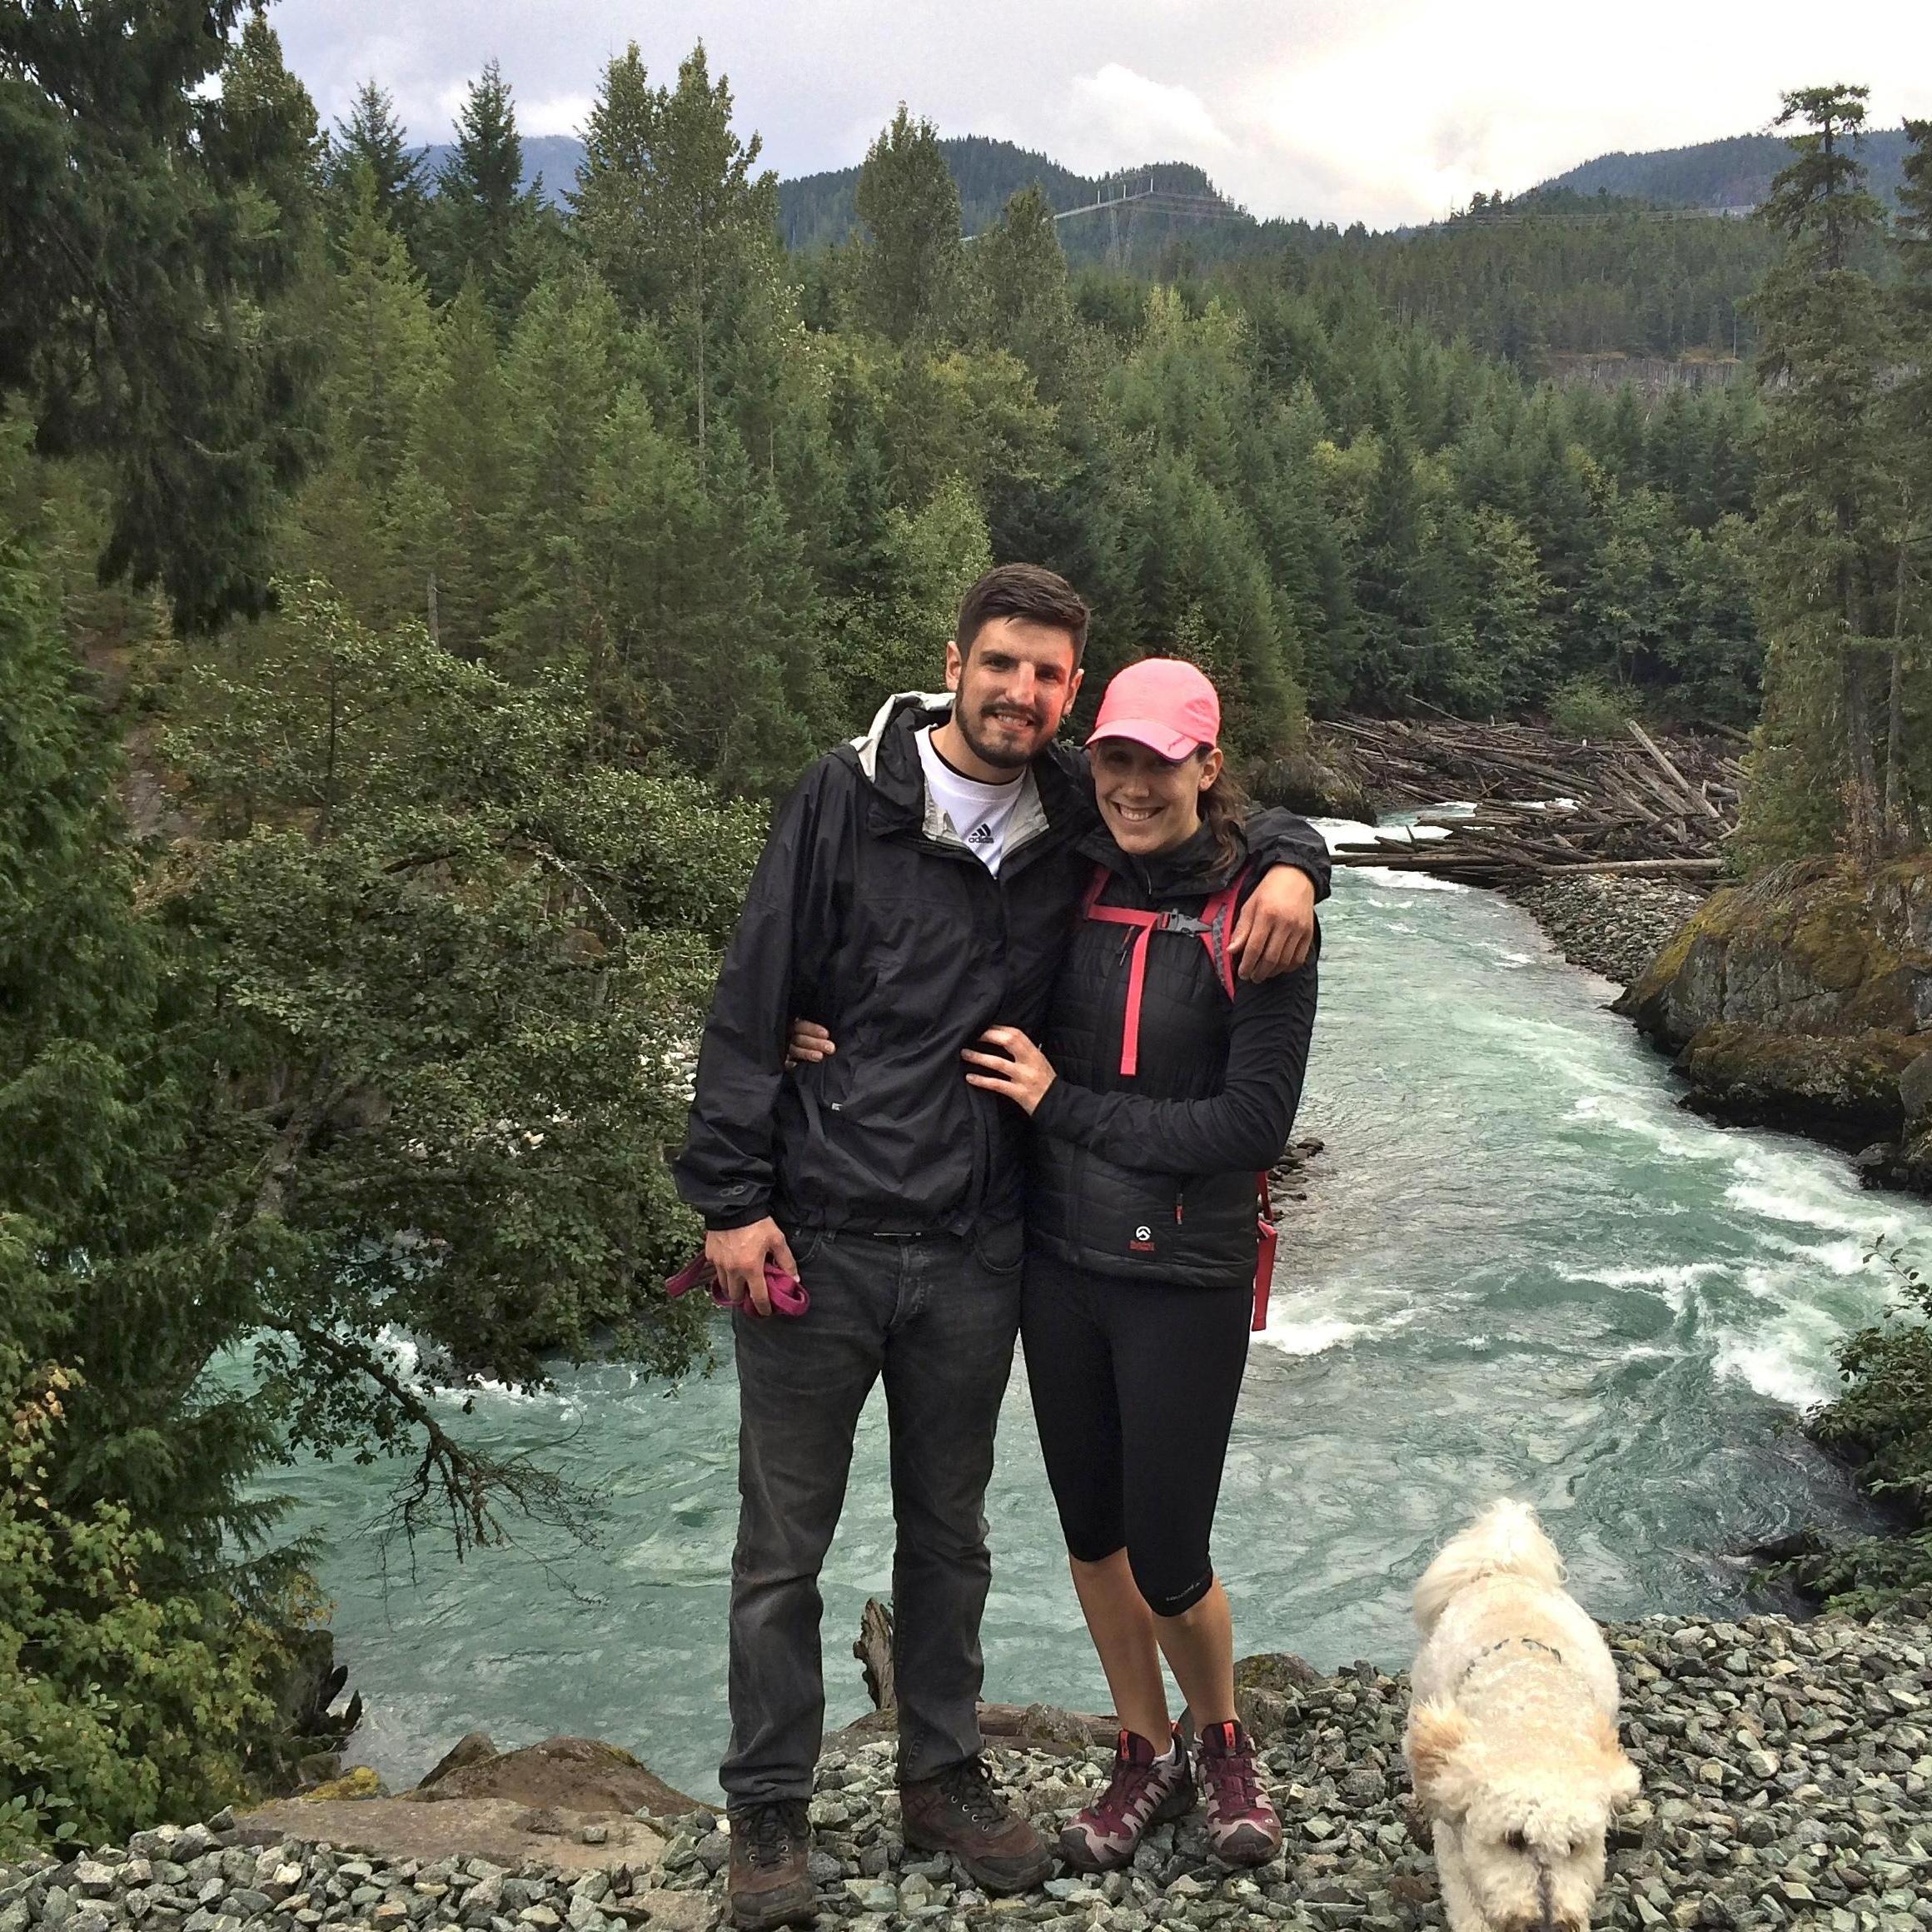 Our first of many adventures, camping in Whistler, BC with Brittany and Anthony.